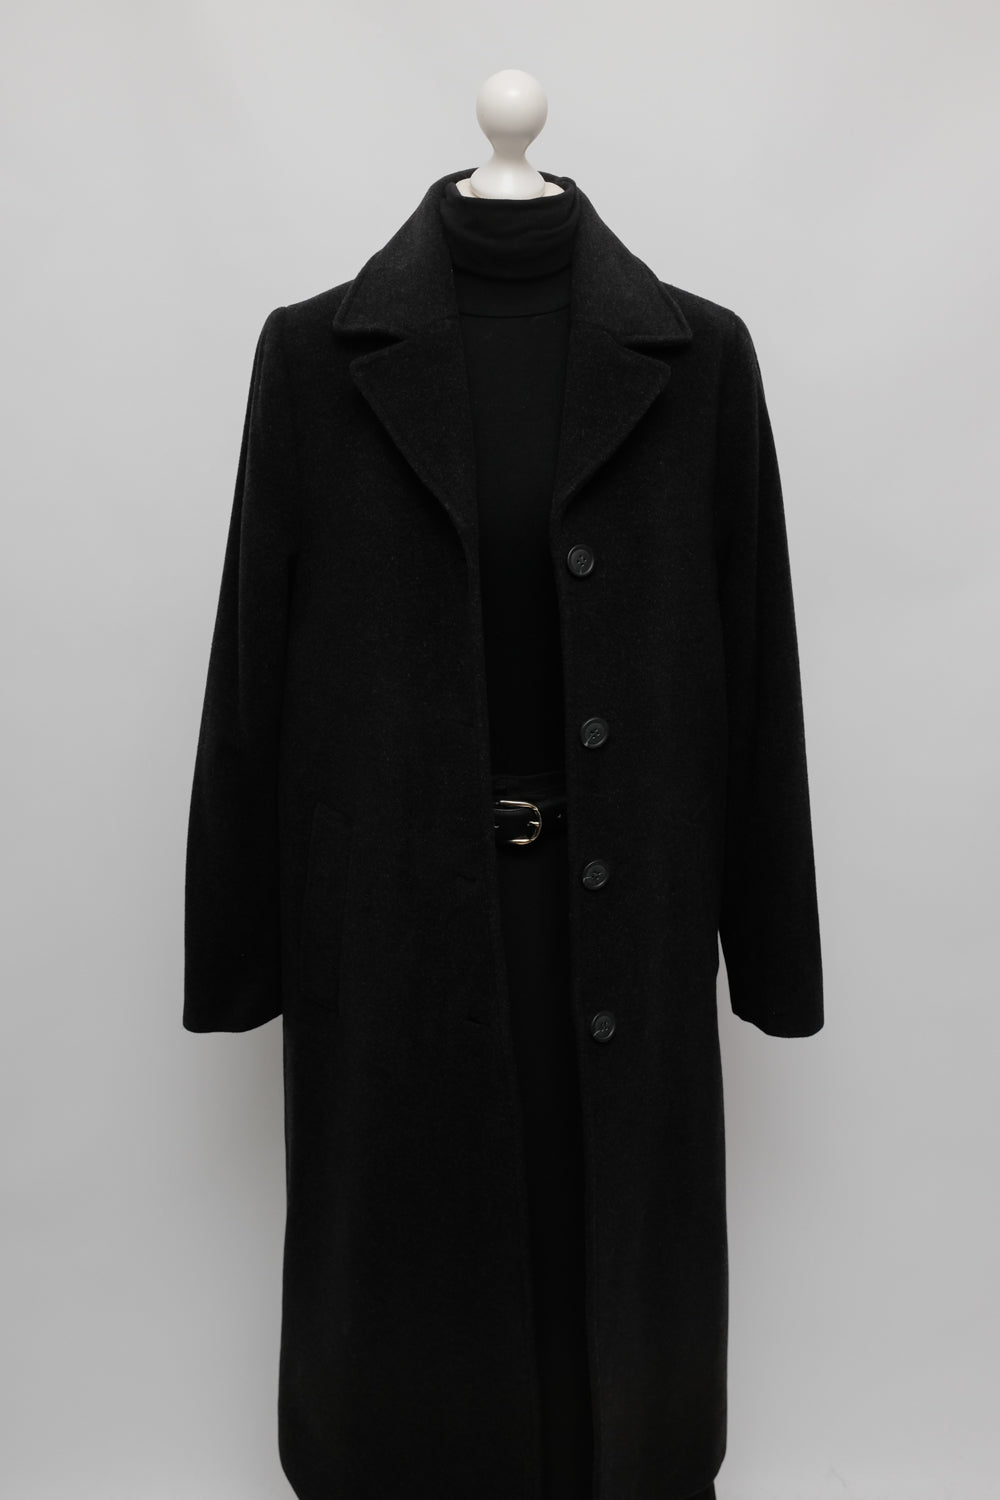 CLASSY WOOL CASHMERE ANTHRACITE VINTAGE COAT